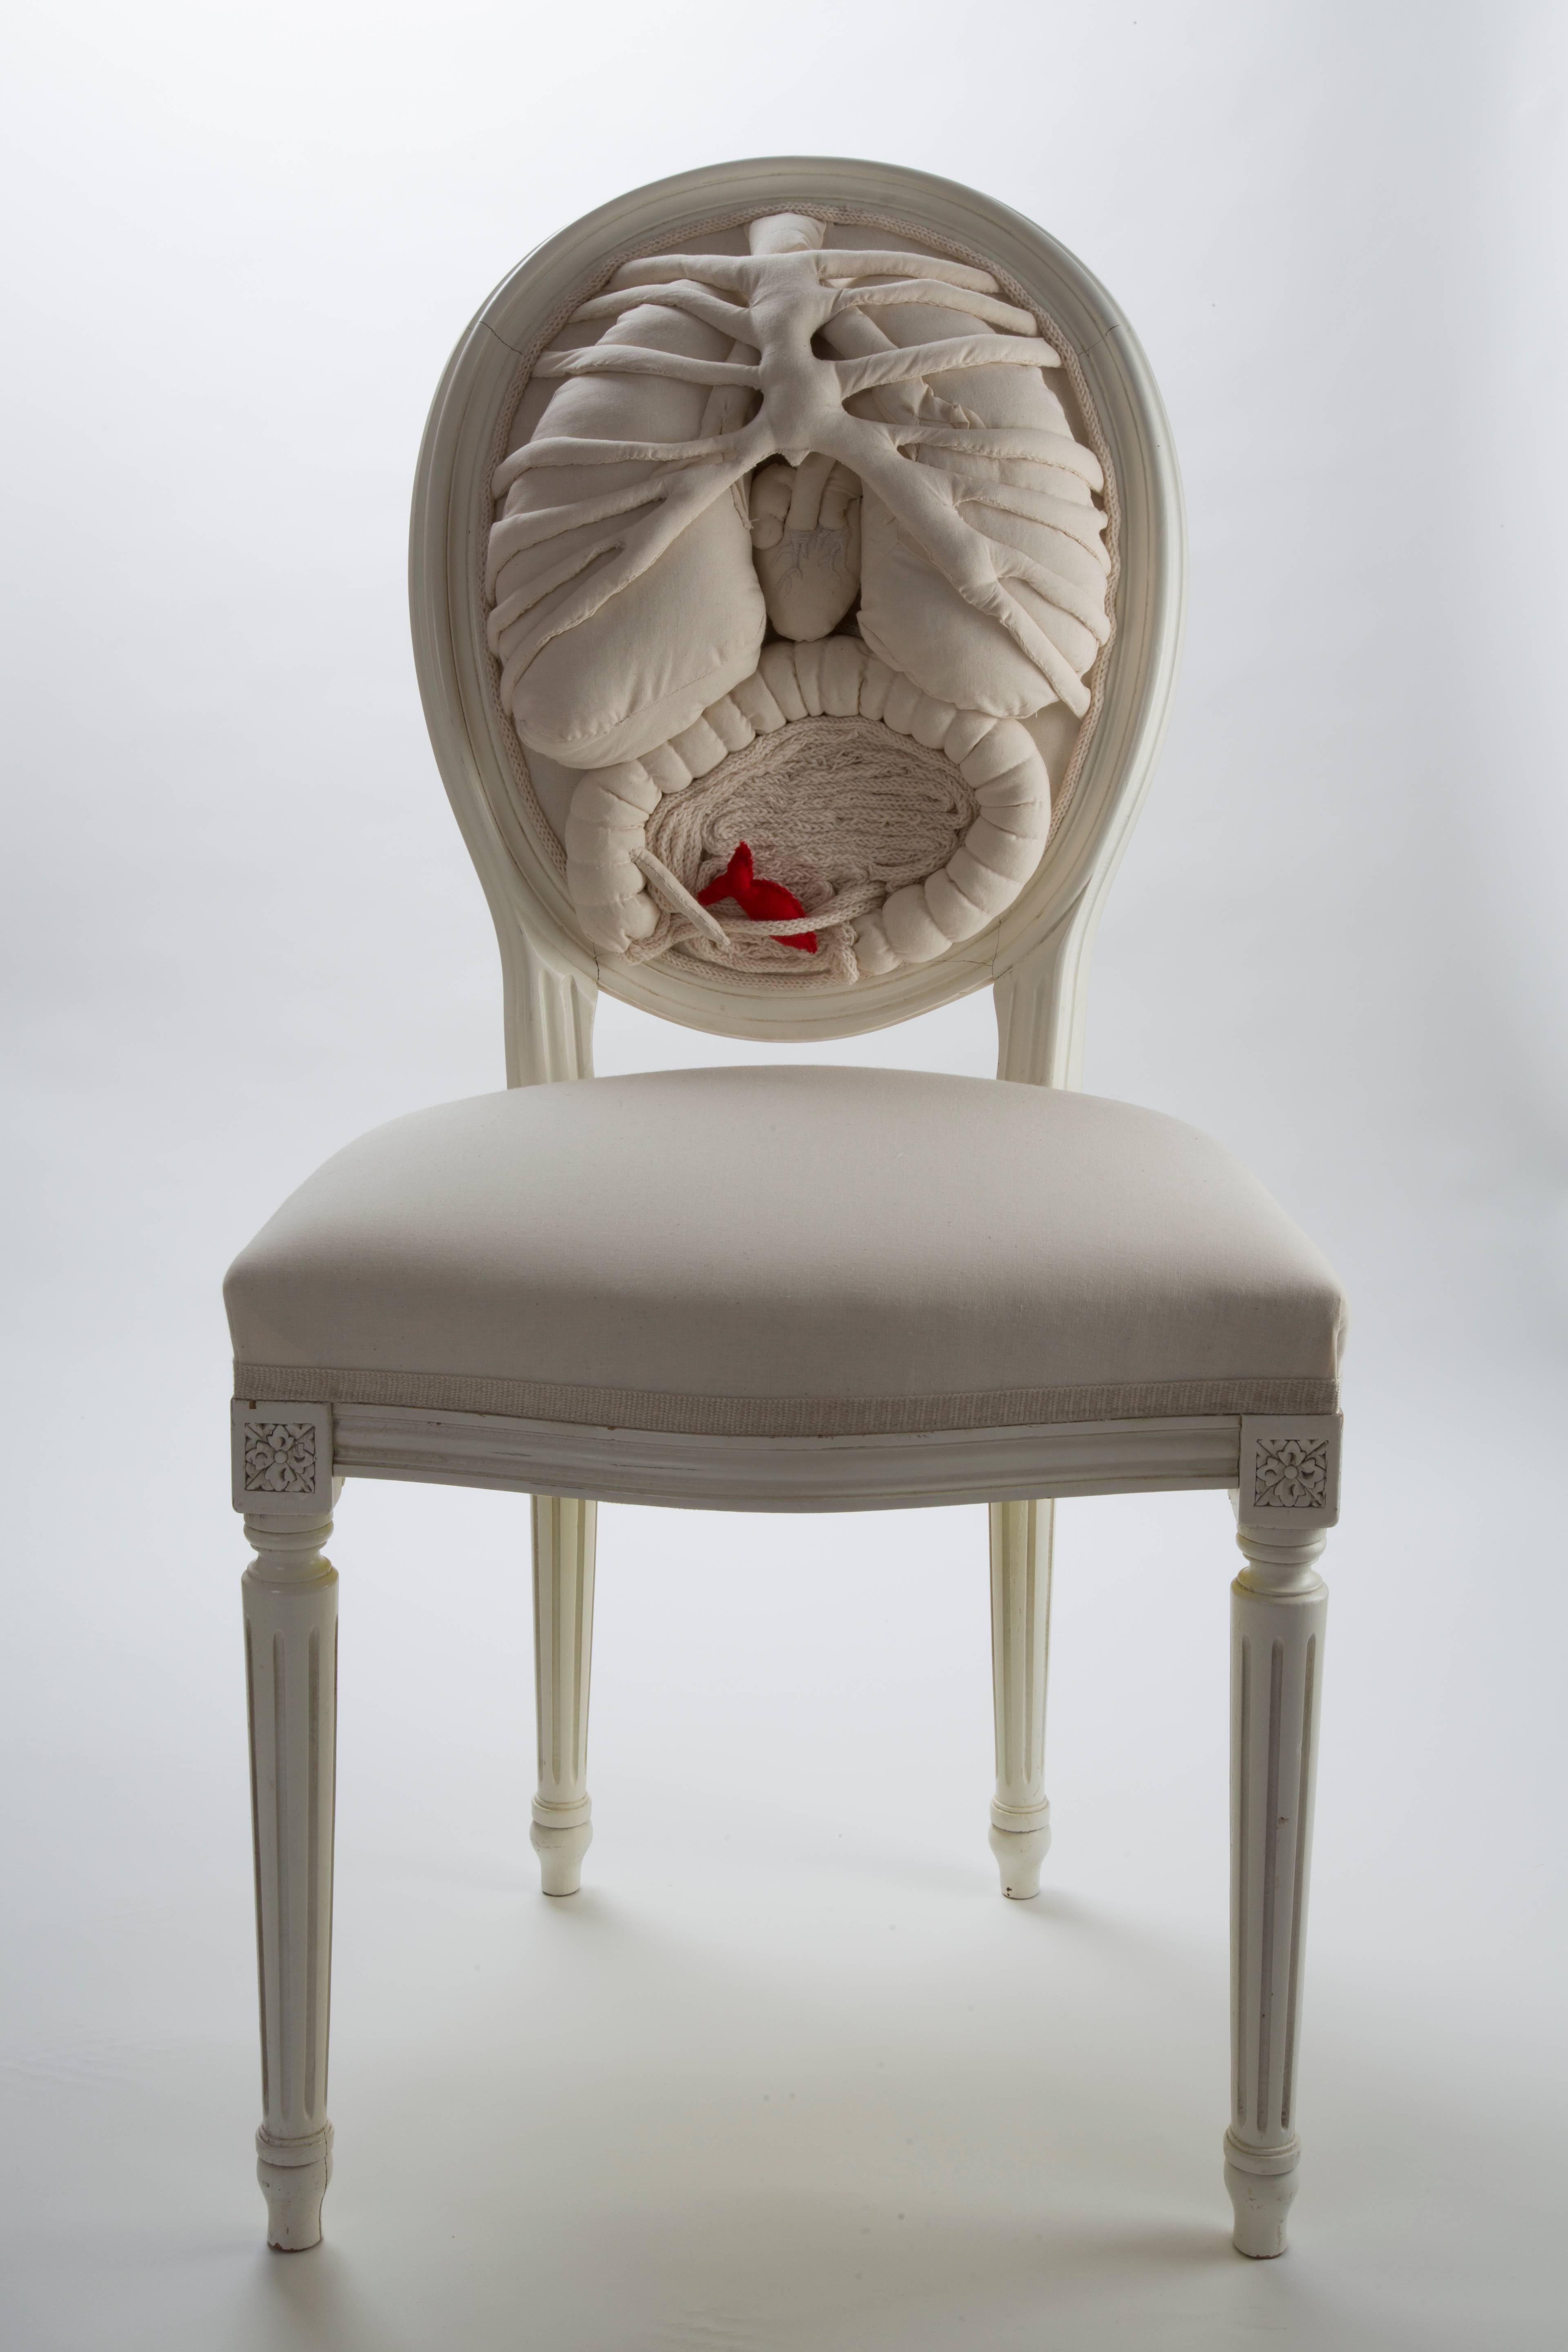 Incredible one of a kind white chair anatomia
by French artist.
Handmade embroidered in a white Louis XVI style chair in beechwood.
These art pieces have plenty of poetry, hidden messages and creativity. 

Dimensions:

Height 96 cm
Width 50